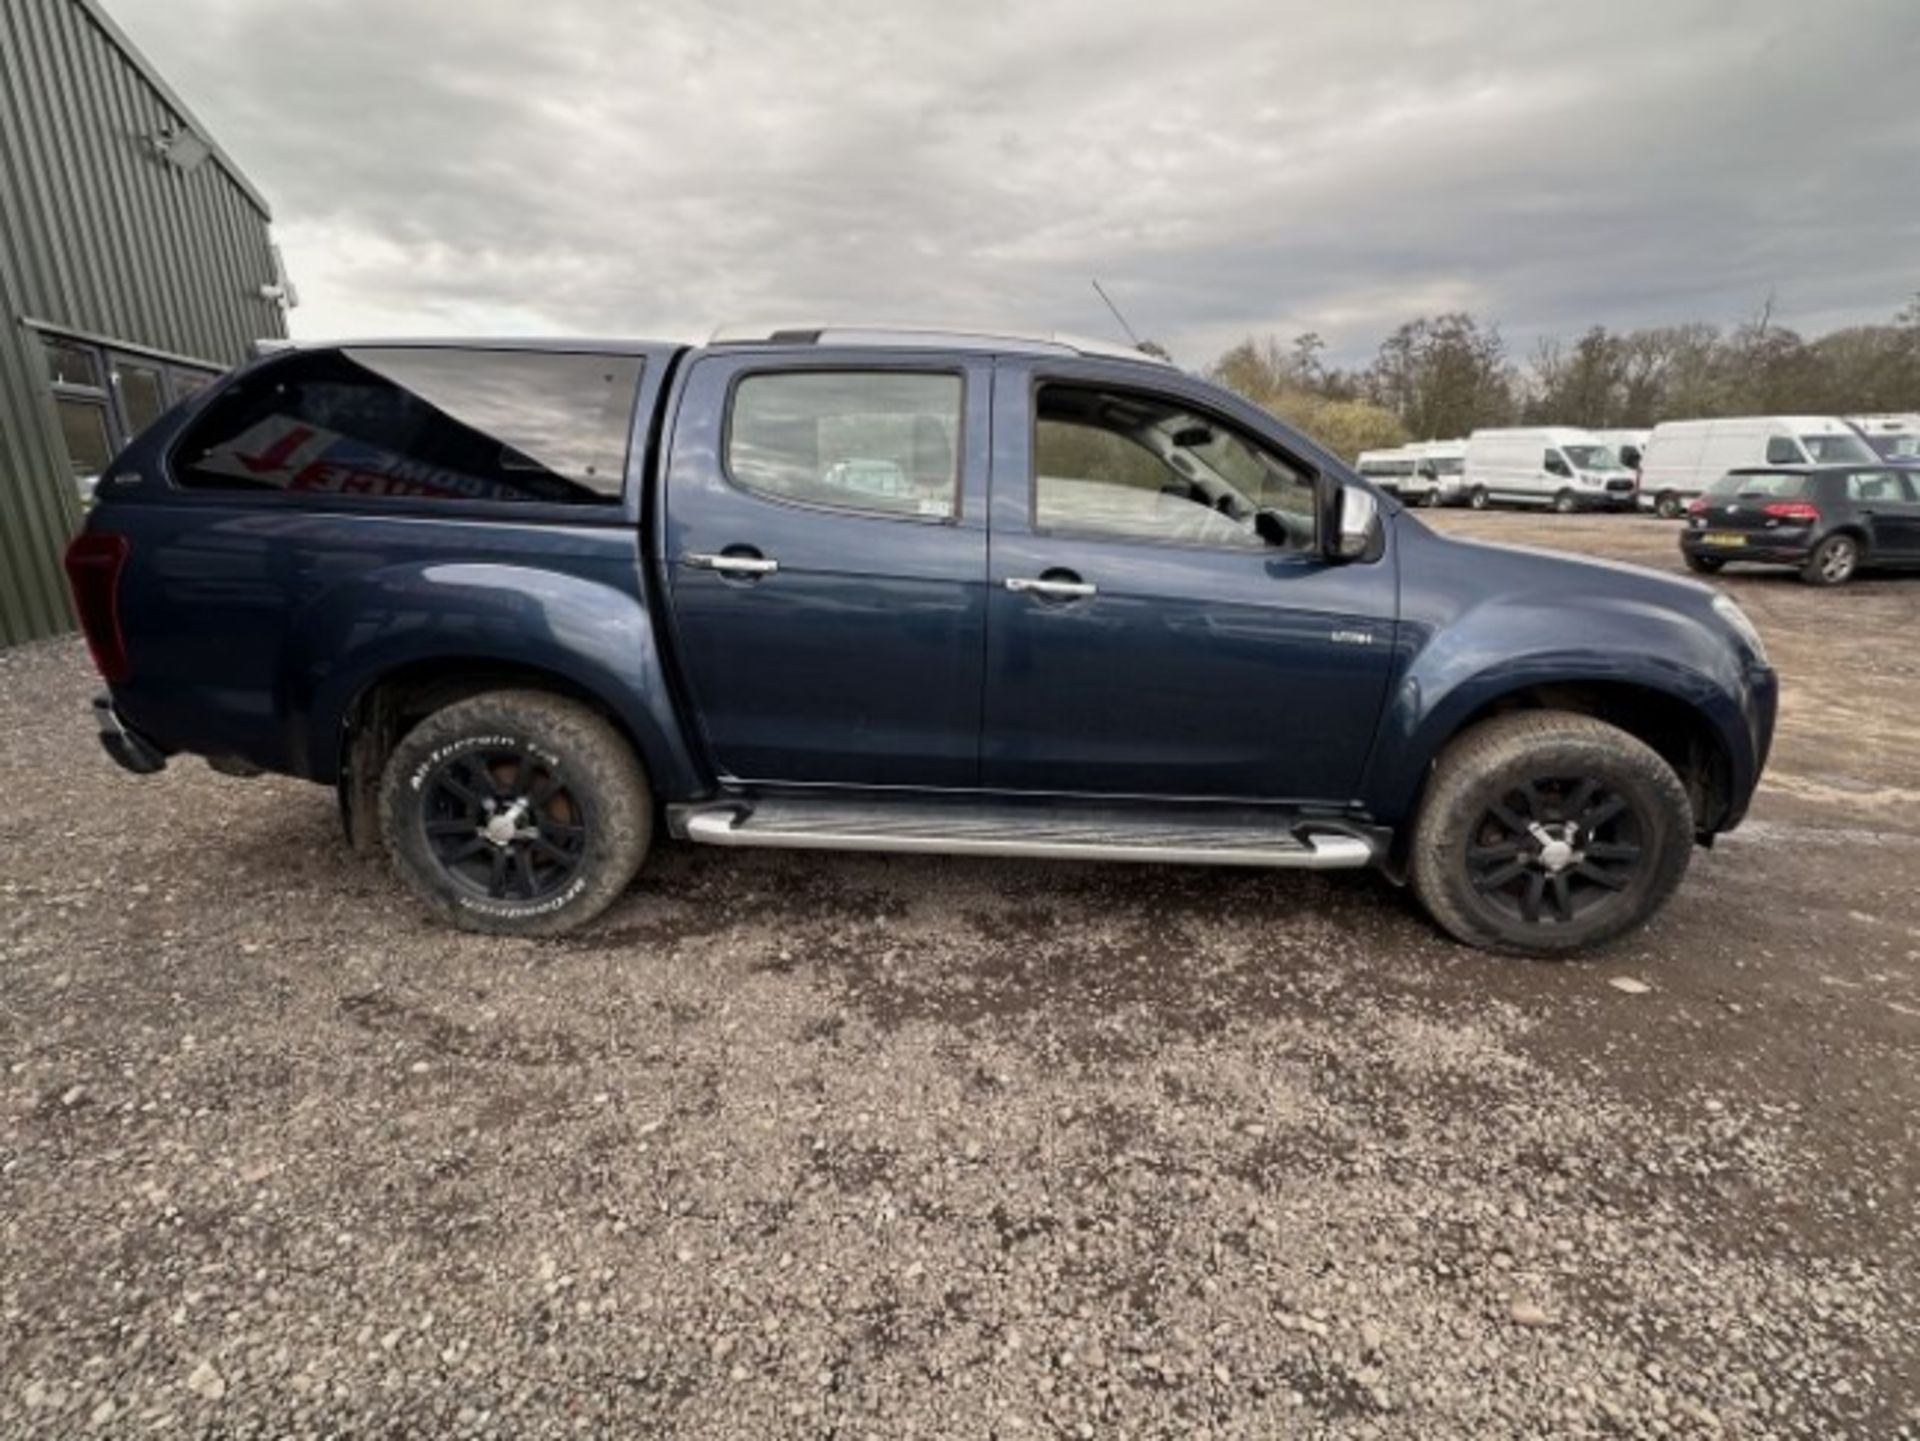 2017 ISUZU D-MAX 4X4: AUTO SPARES OR REPAIRS, READY FOR RESTORATION >>--NO VAT ON HAMMER--<< - Image 2 of 18